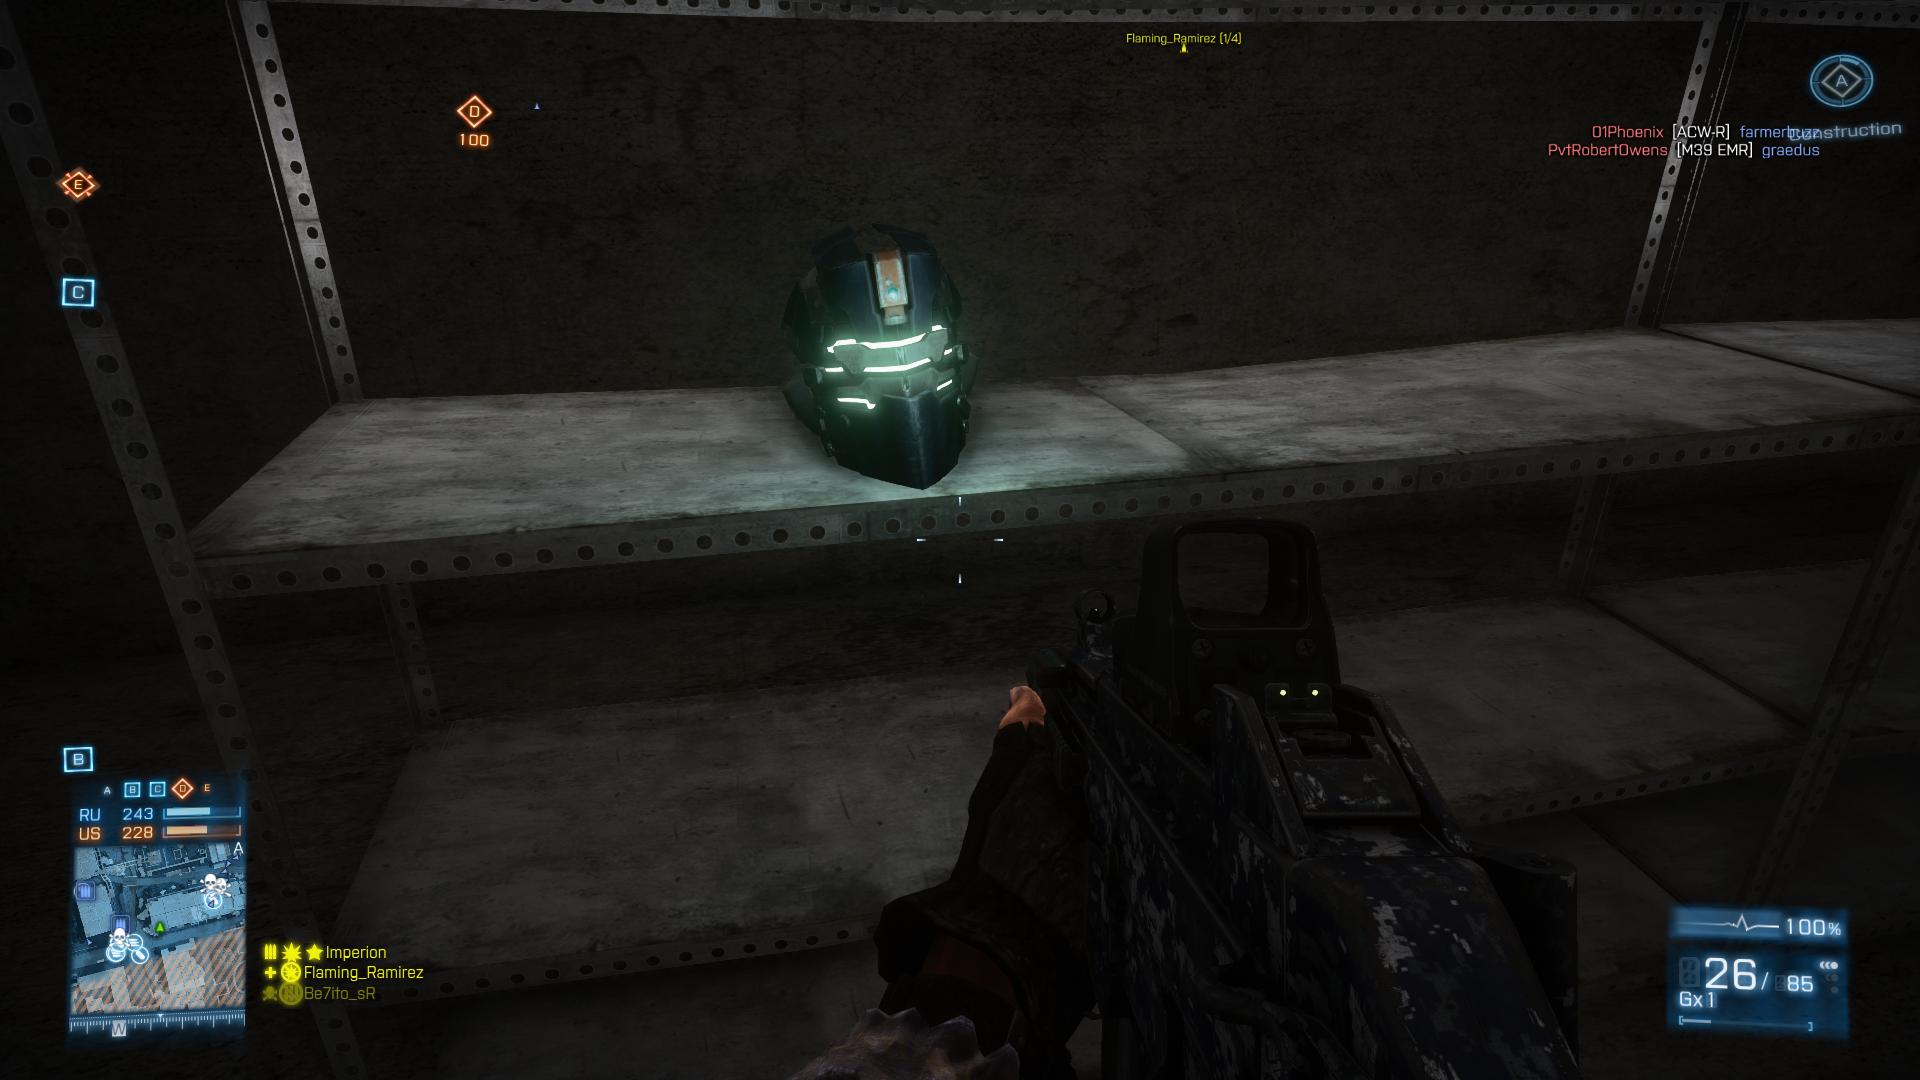 Mirror-s-Edge-and-Dead-Space-3-Easter-Eggs-Found-in-Battlefield-3-Aftermath-3.jpg